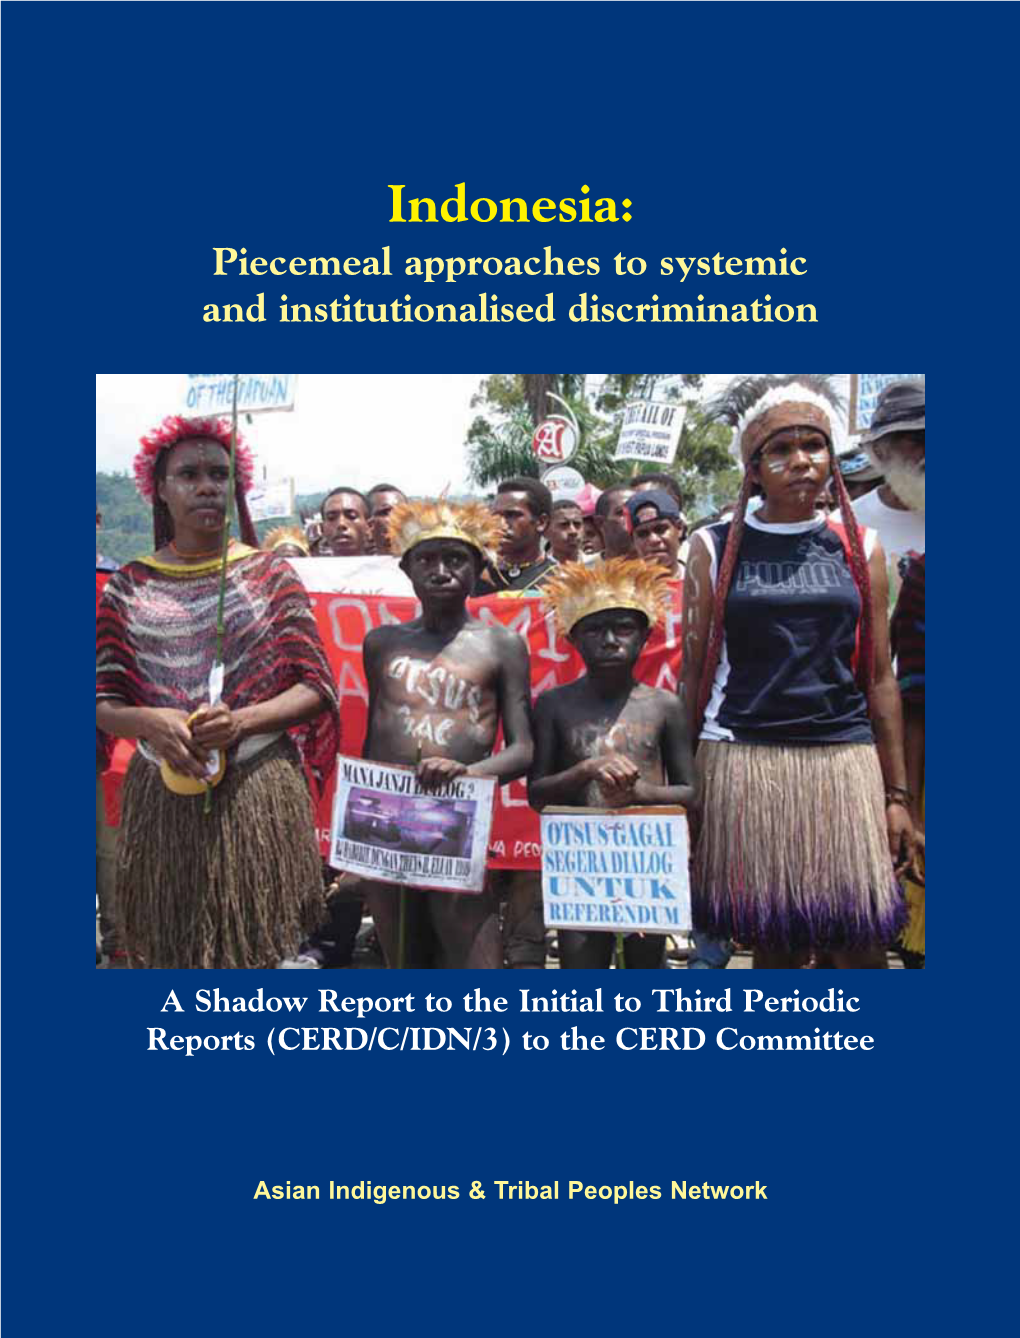 Indonesia: Piecemeal Approaches to Systemic and Institutionalised Discrimination